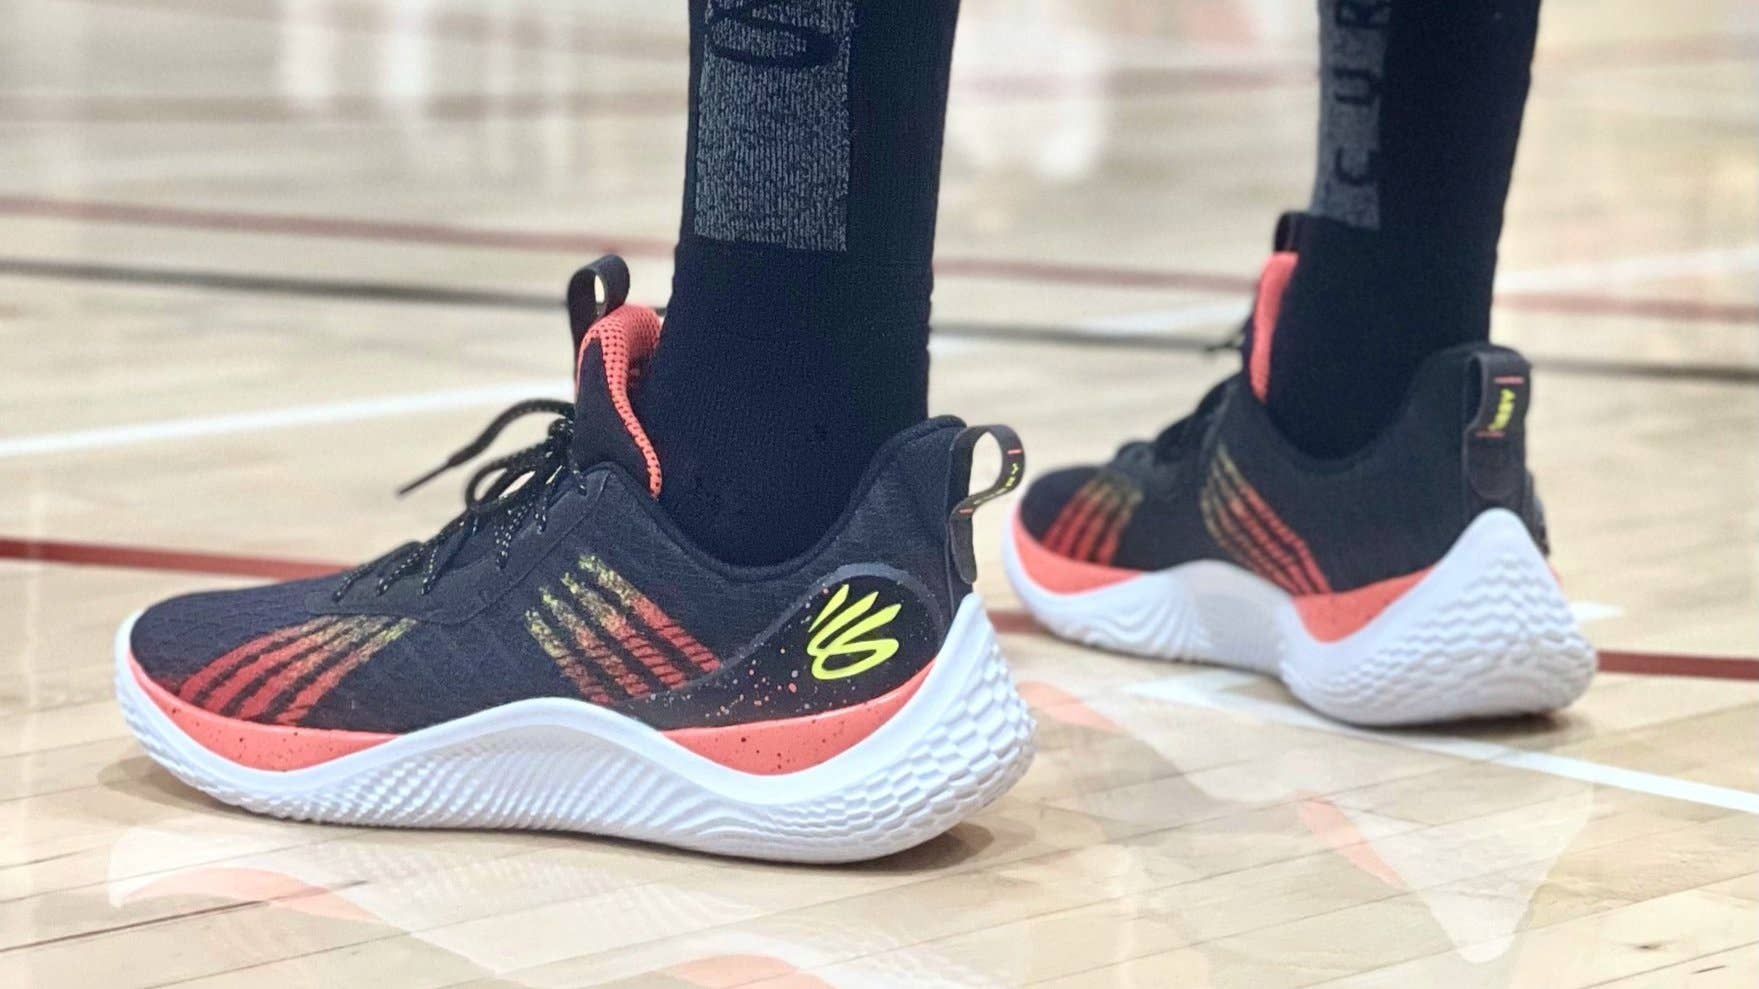 Stephen Curry's Exact 'Chinese New Year' Under Armour Curry 4